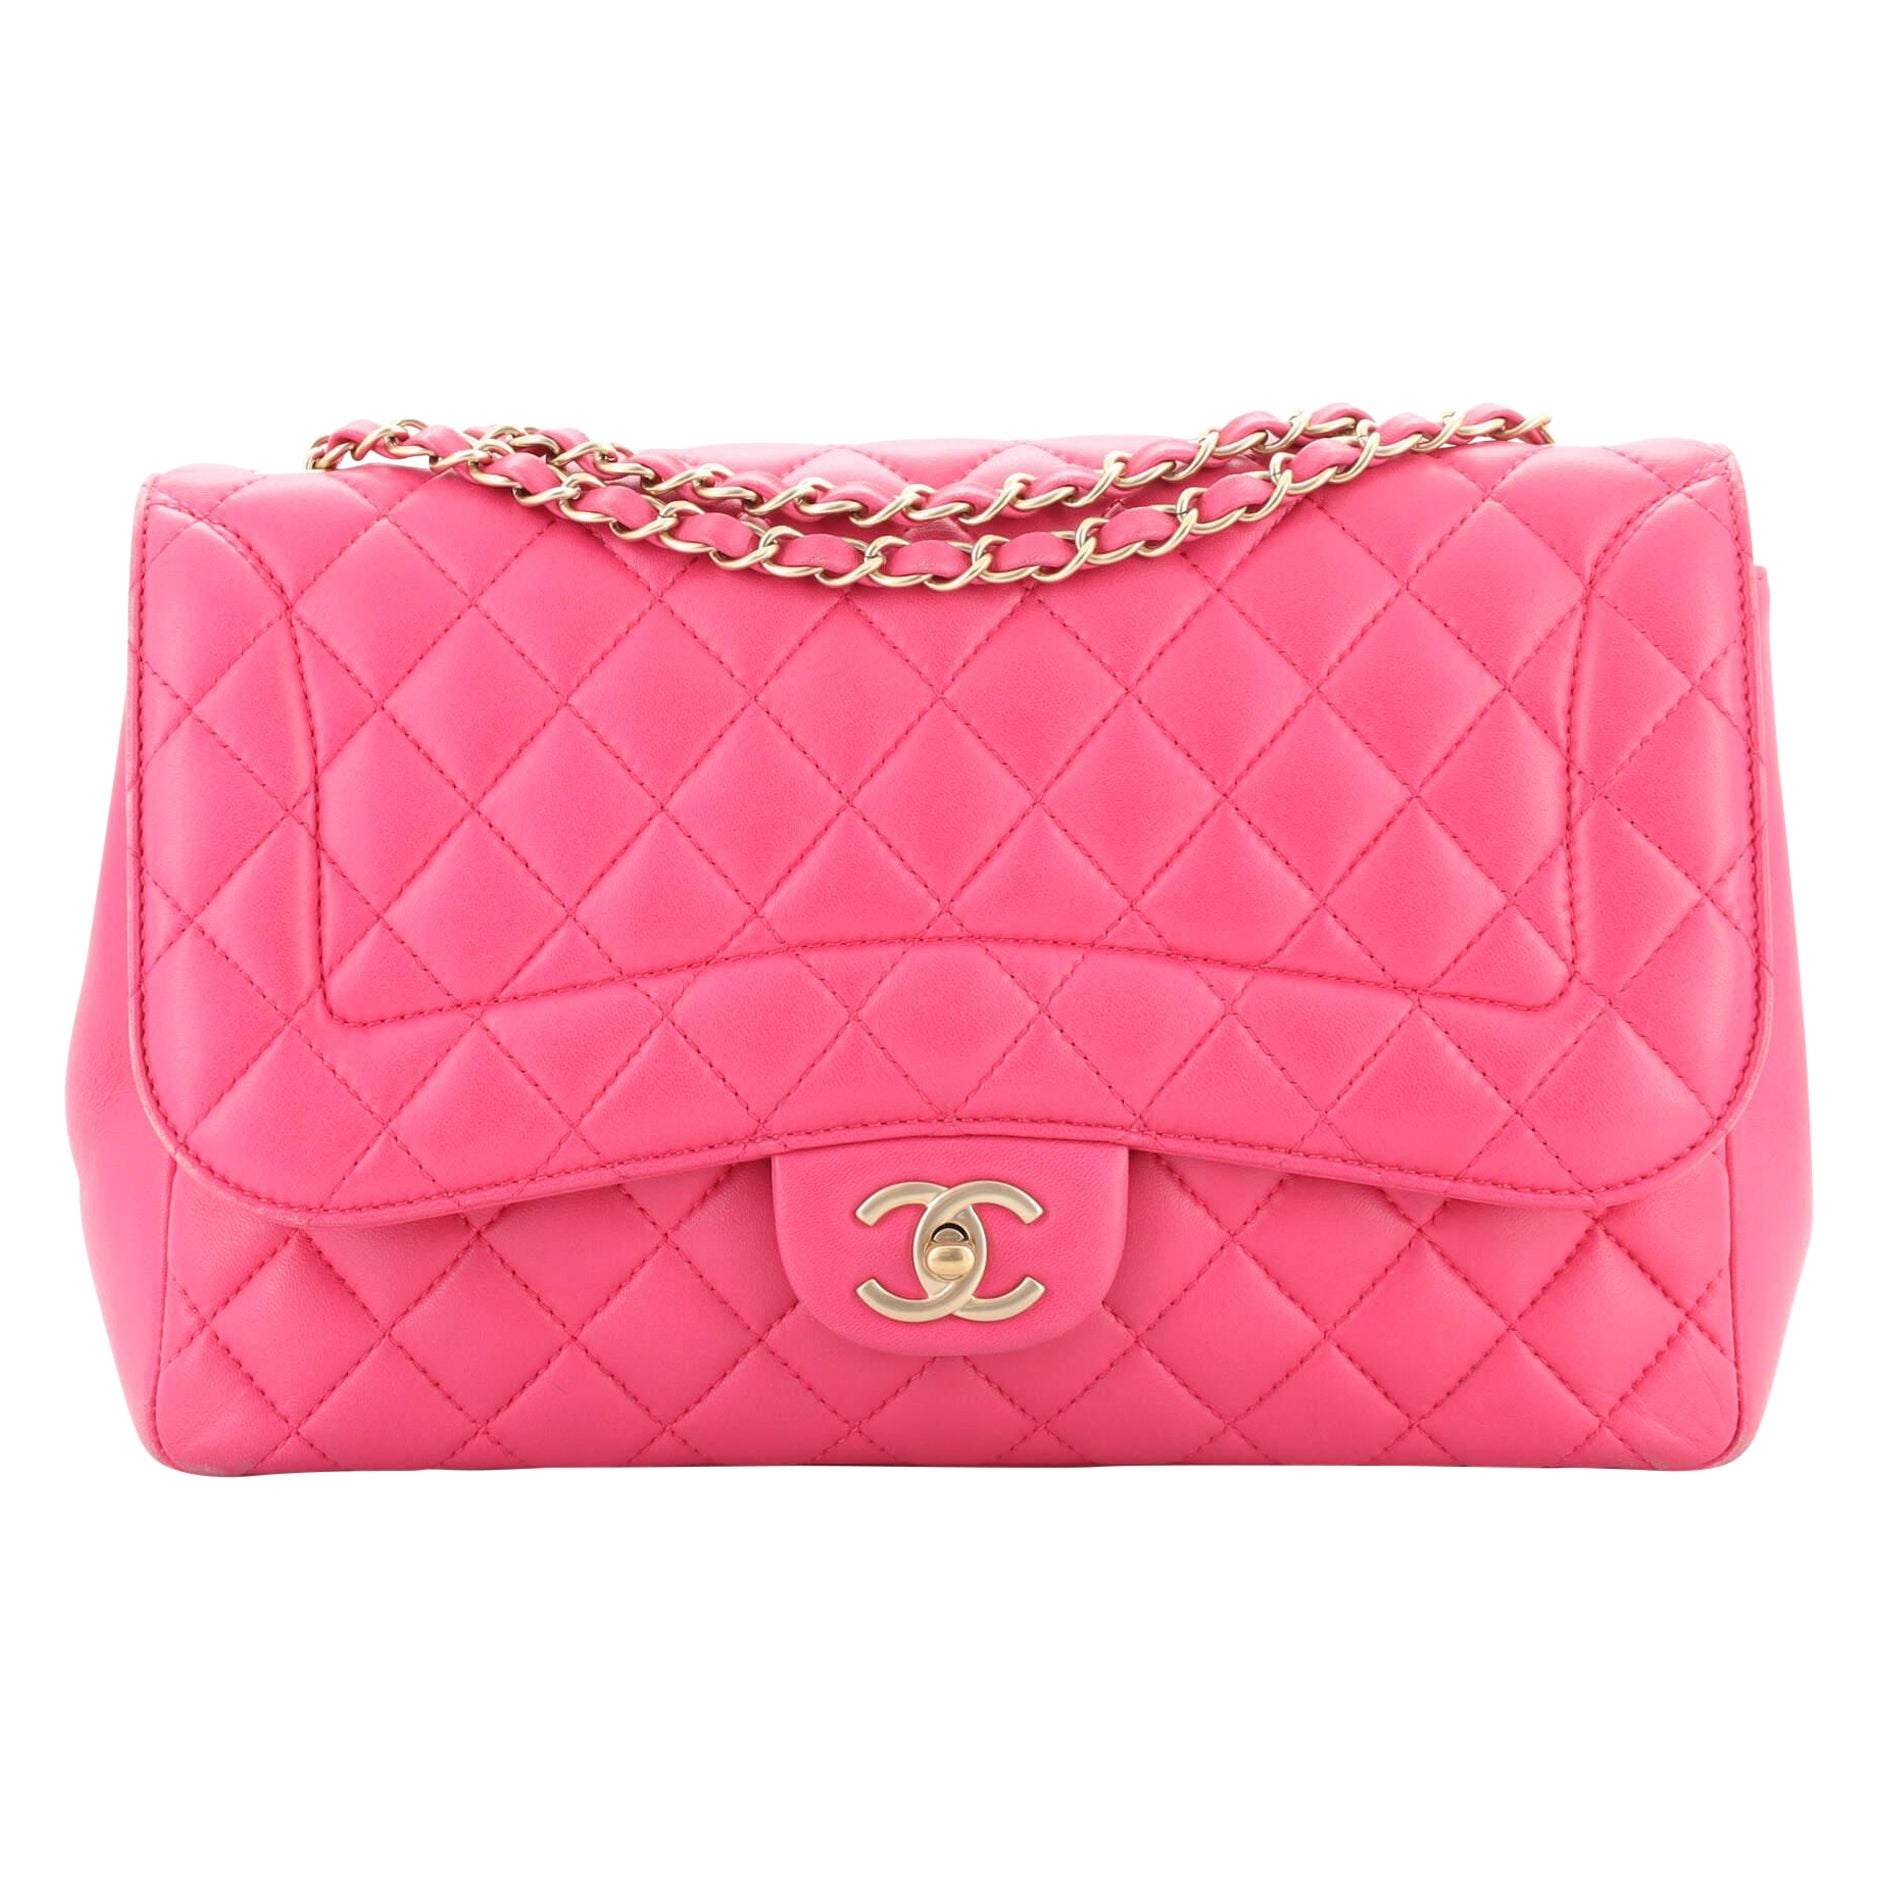 Chanel Mademoiselle Chic Flap Bag Quilted Lambskin Jumbo